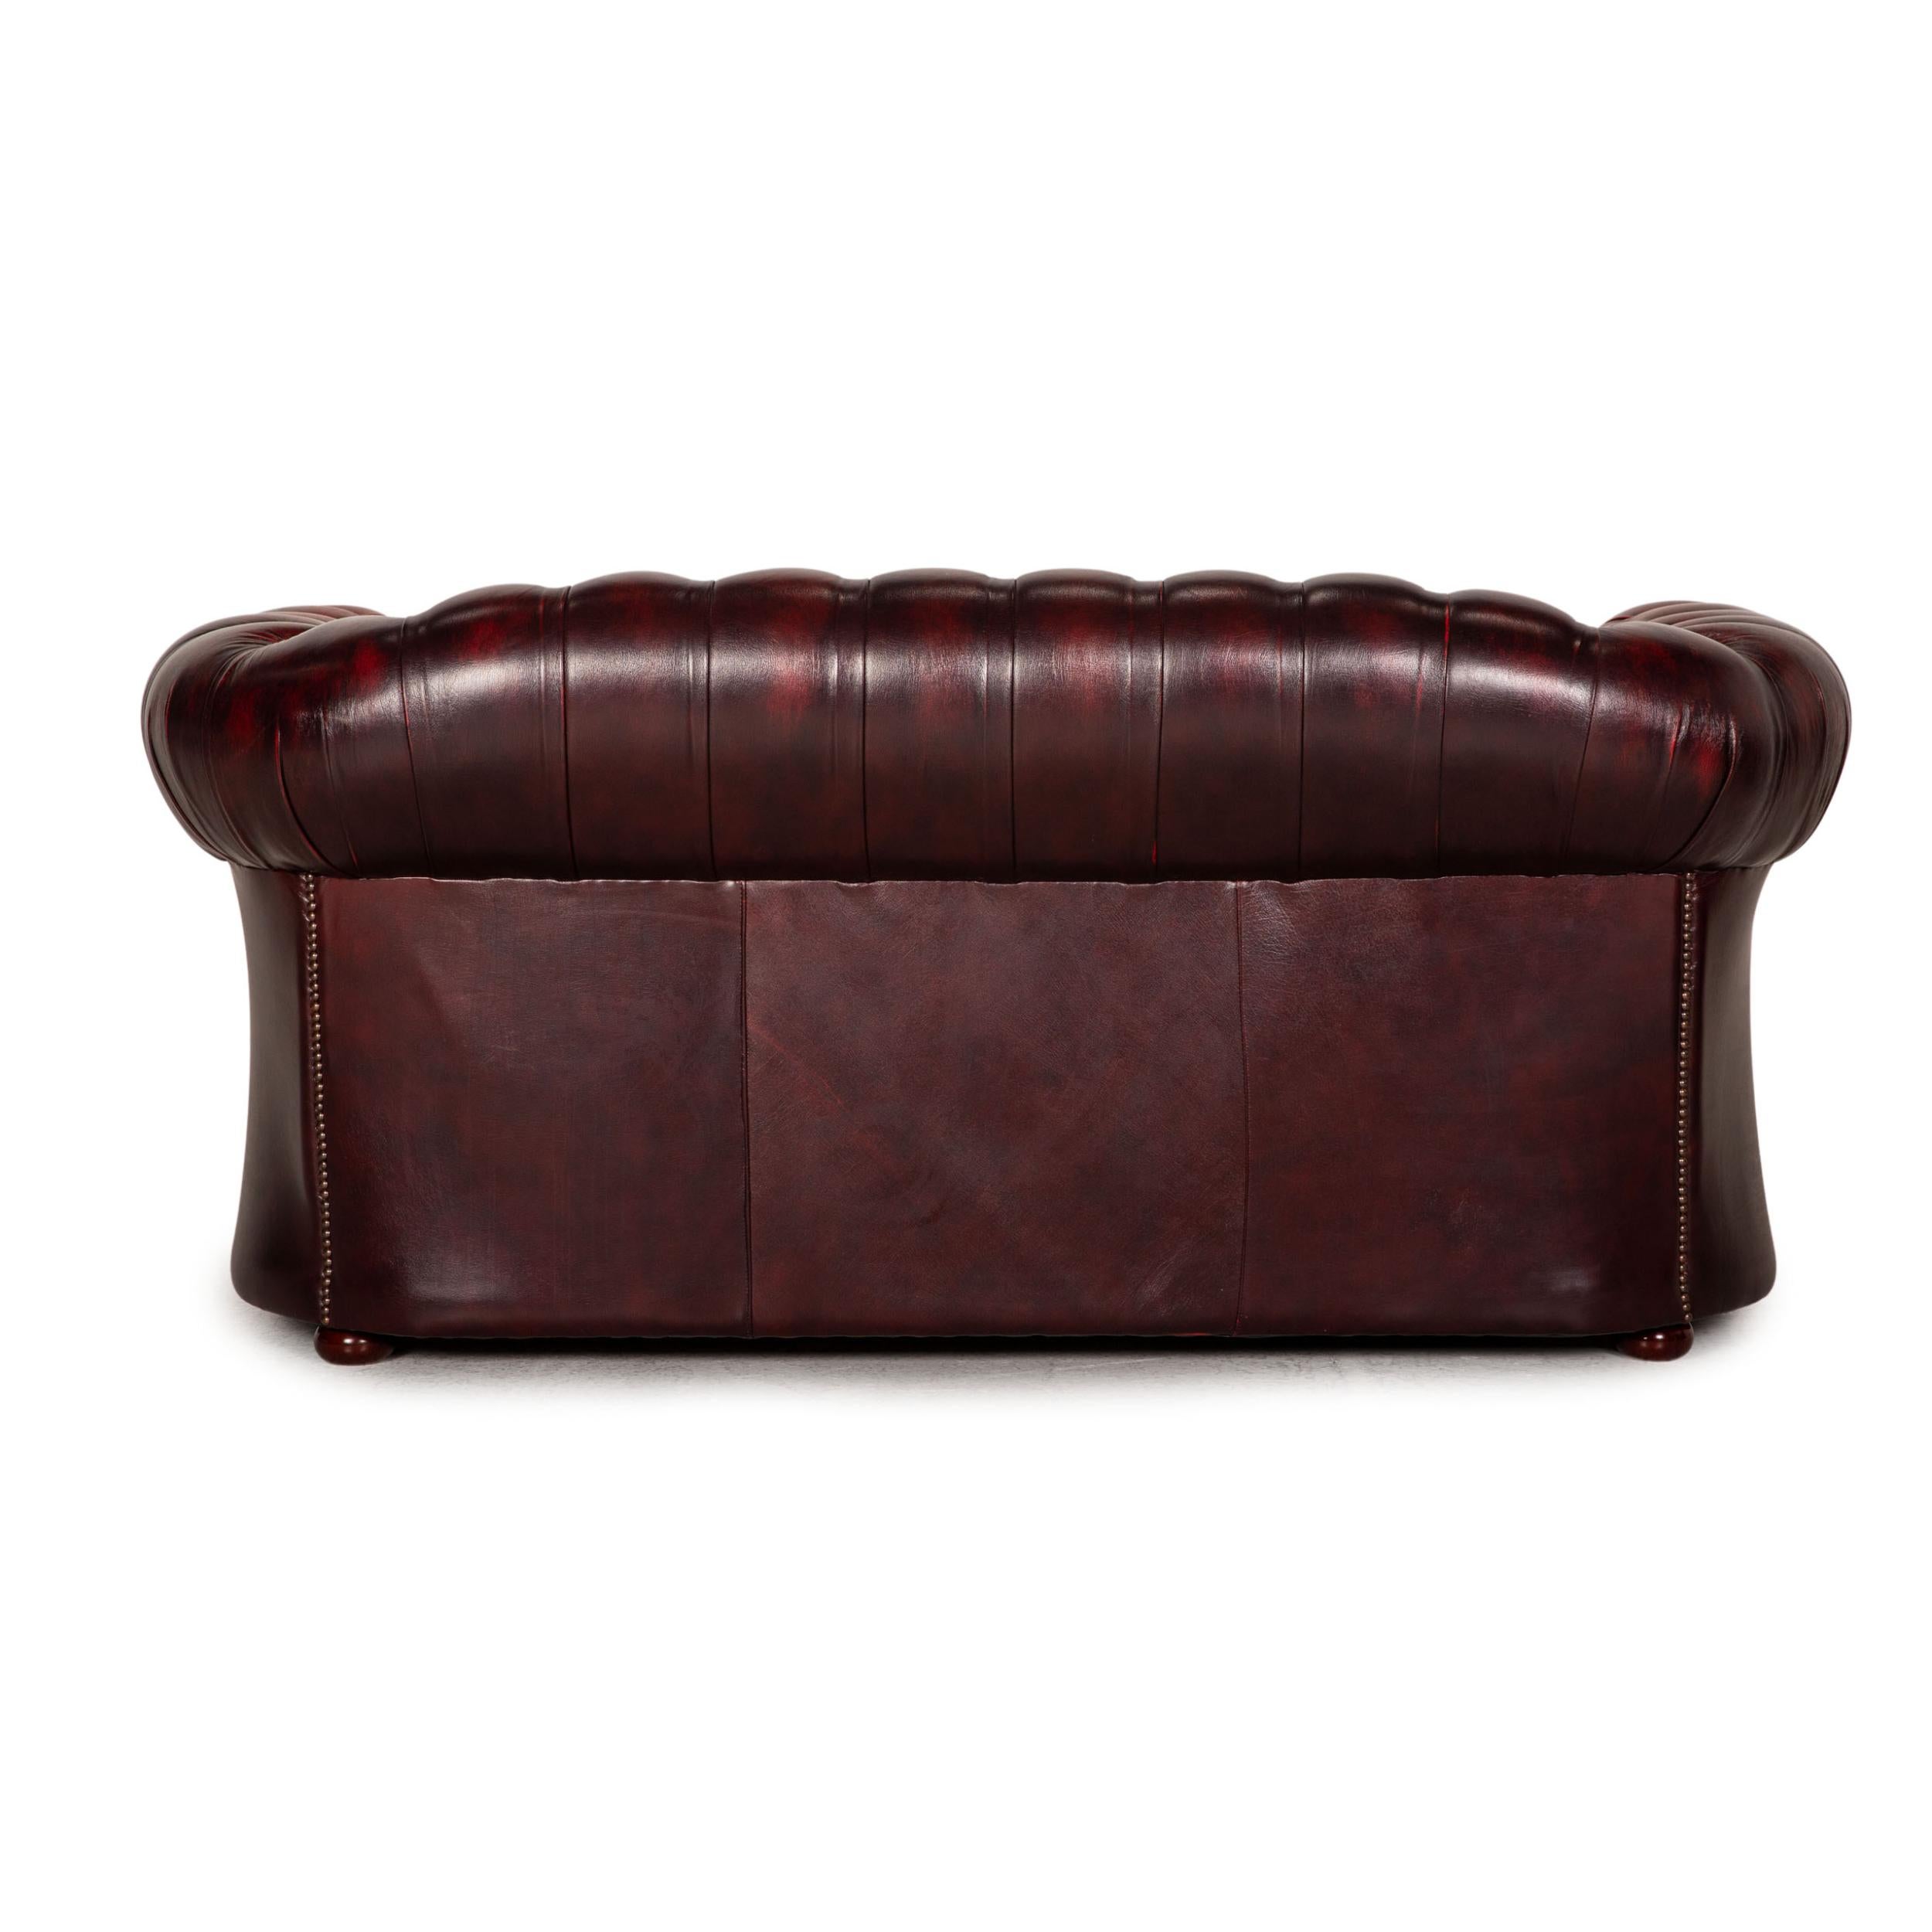 Chesterfield Tudor Leather Sofa Dark Red Two Seater Couch 2